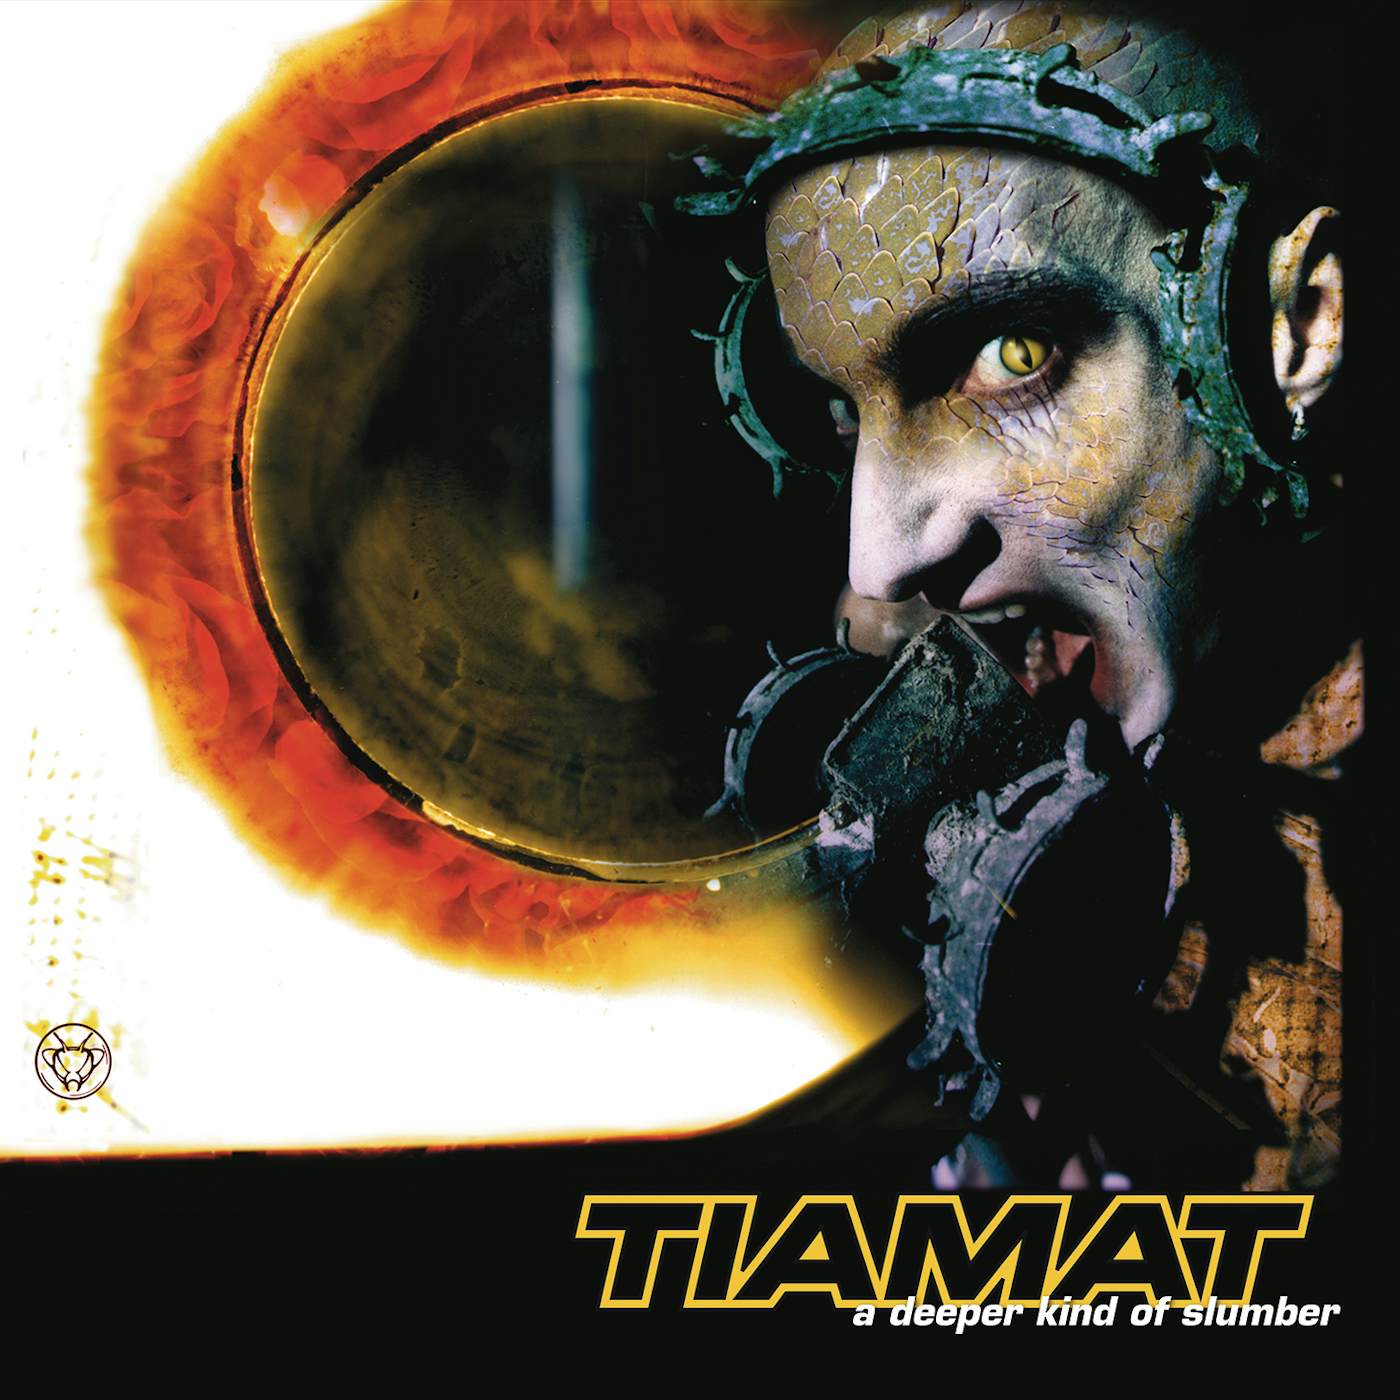 Tiamat DEEPER KIND OF SLUMBER - Limited Edition 180 Gram Gold Colored Vinyl Record